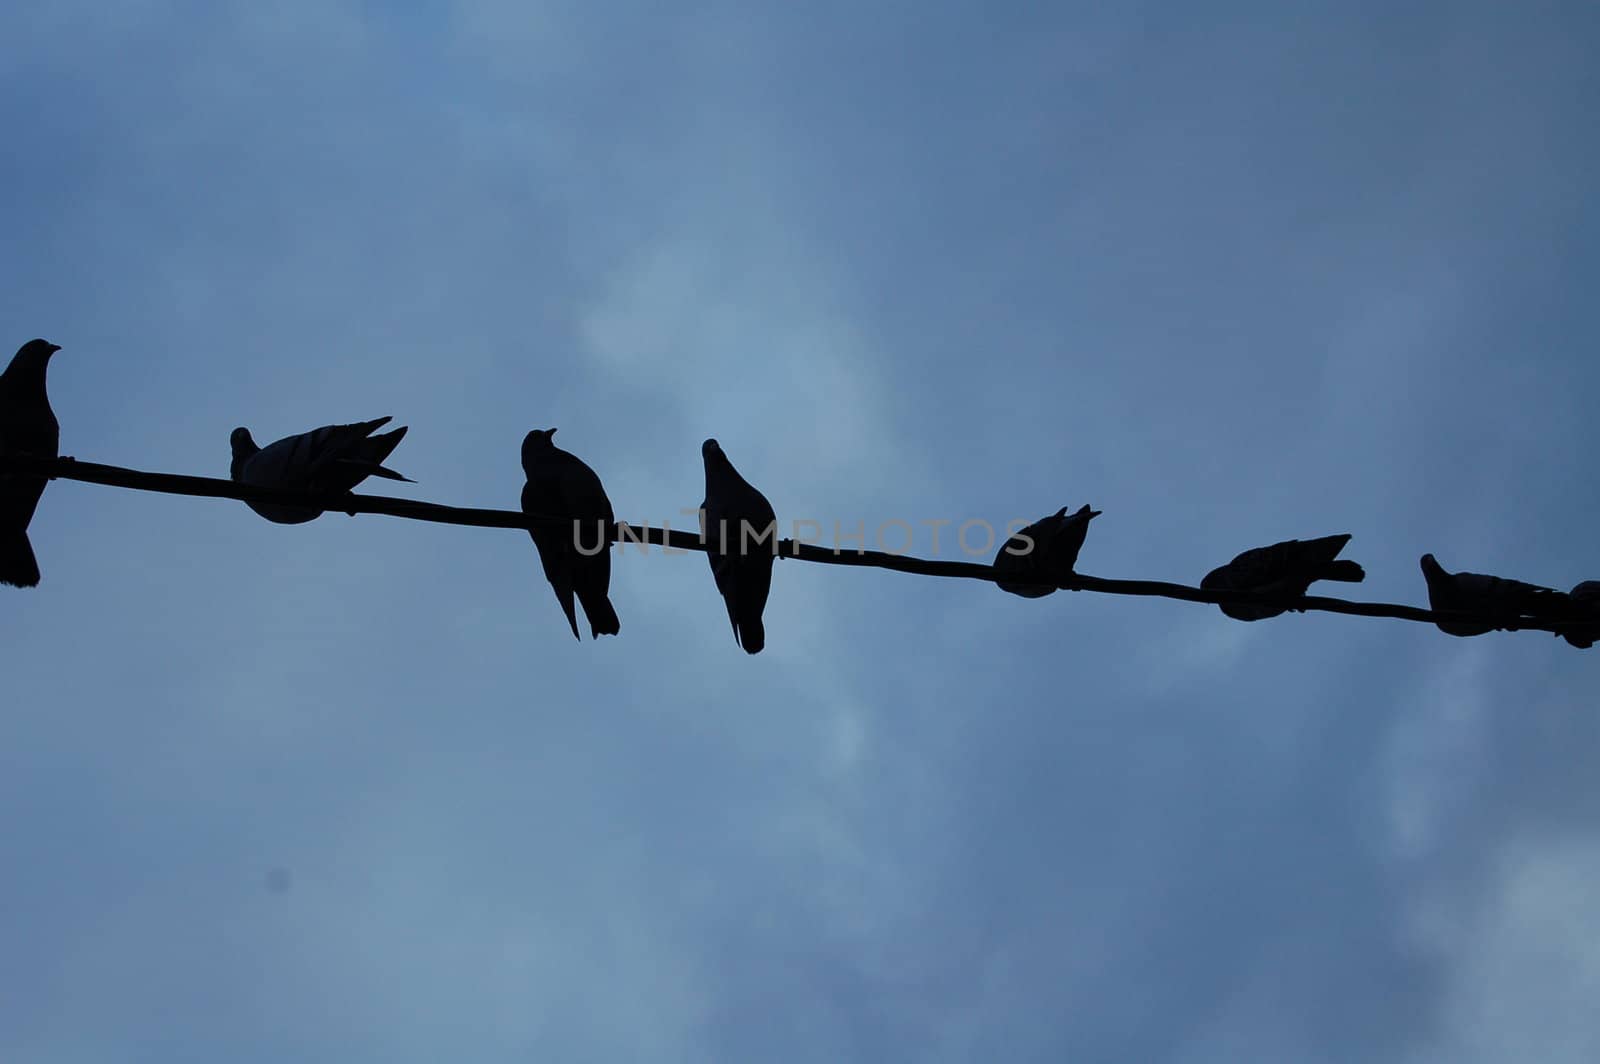 doves on a wire2 by mojly